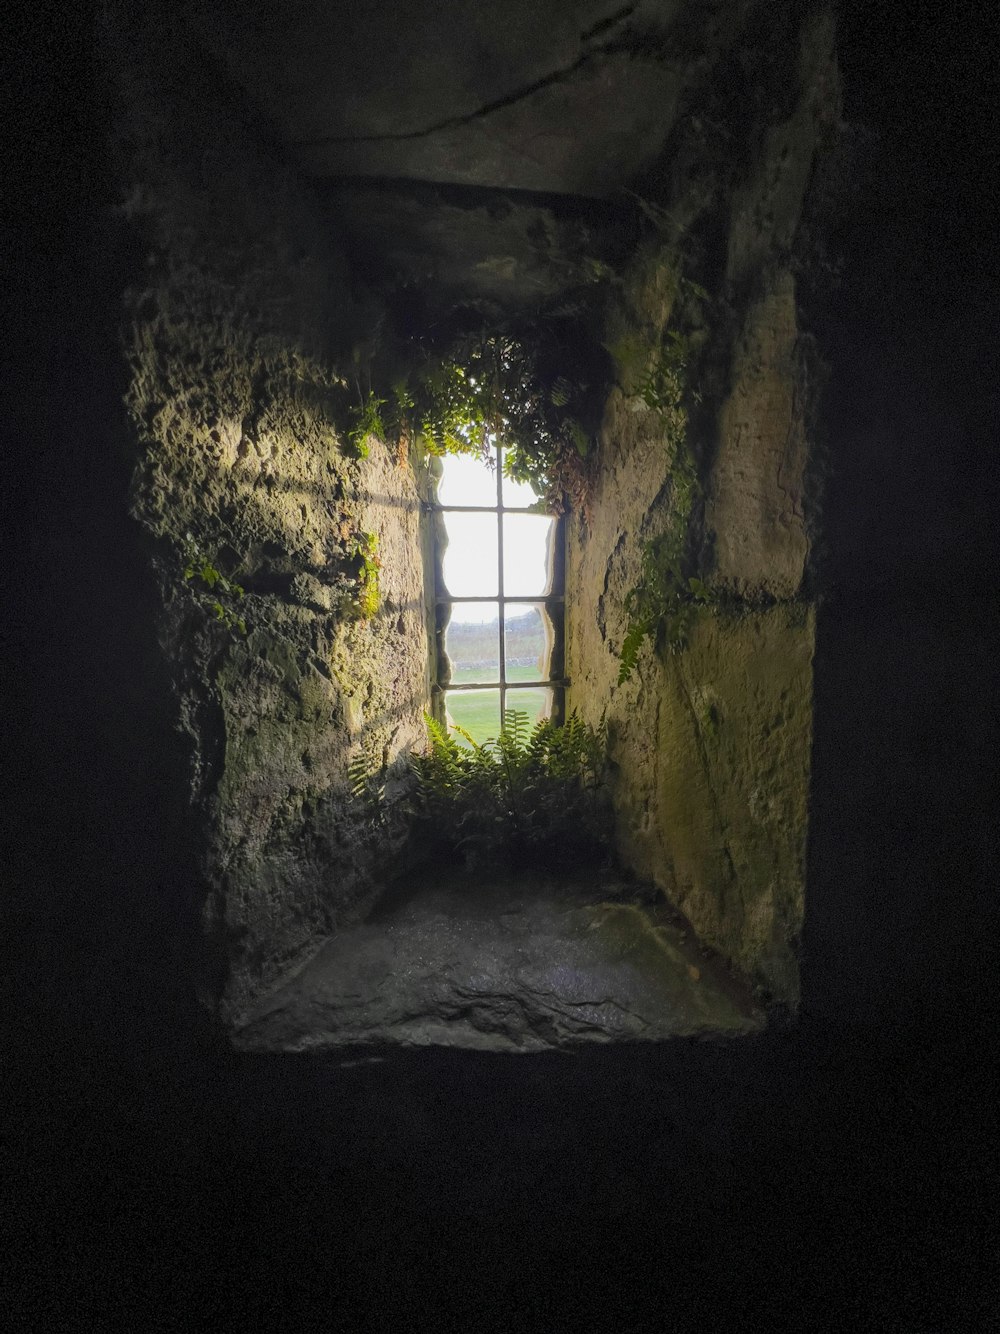 a window in a stone wall with moss growing on it